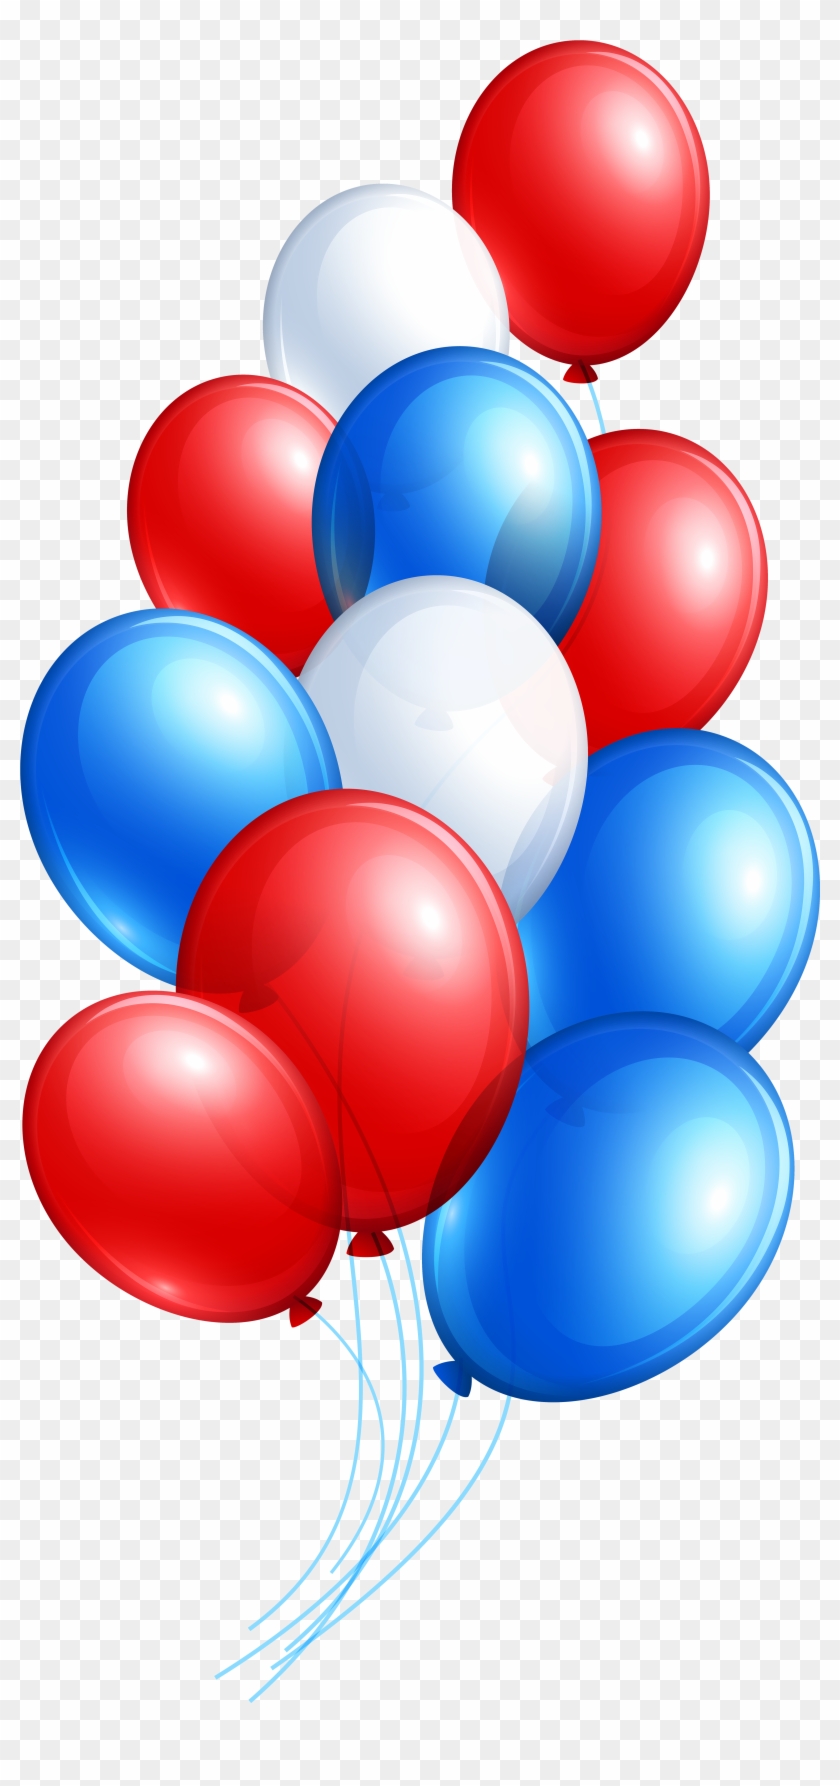 Balloon Clipart 4th July - Red And Blue Balloons Clipart #502621